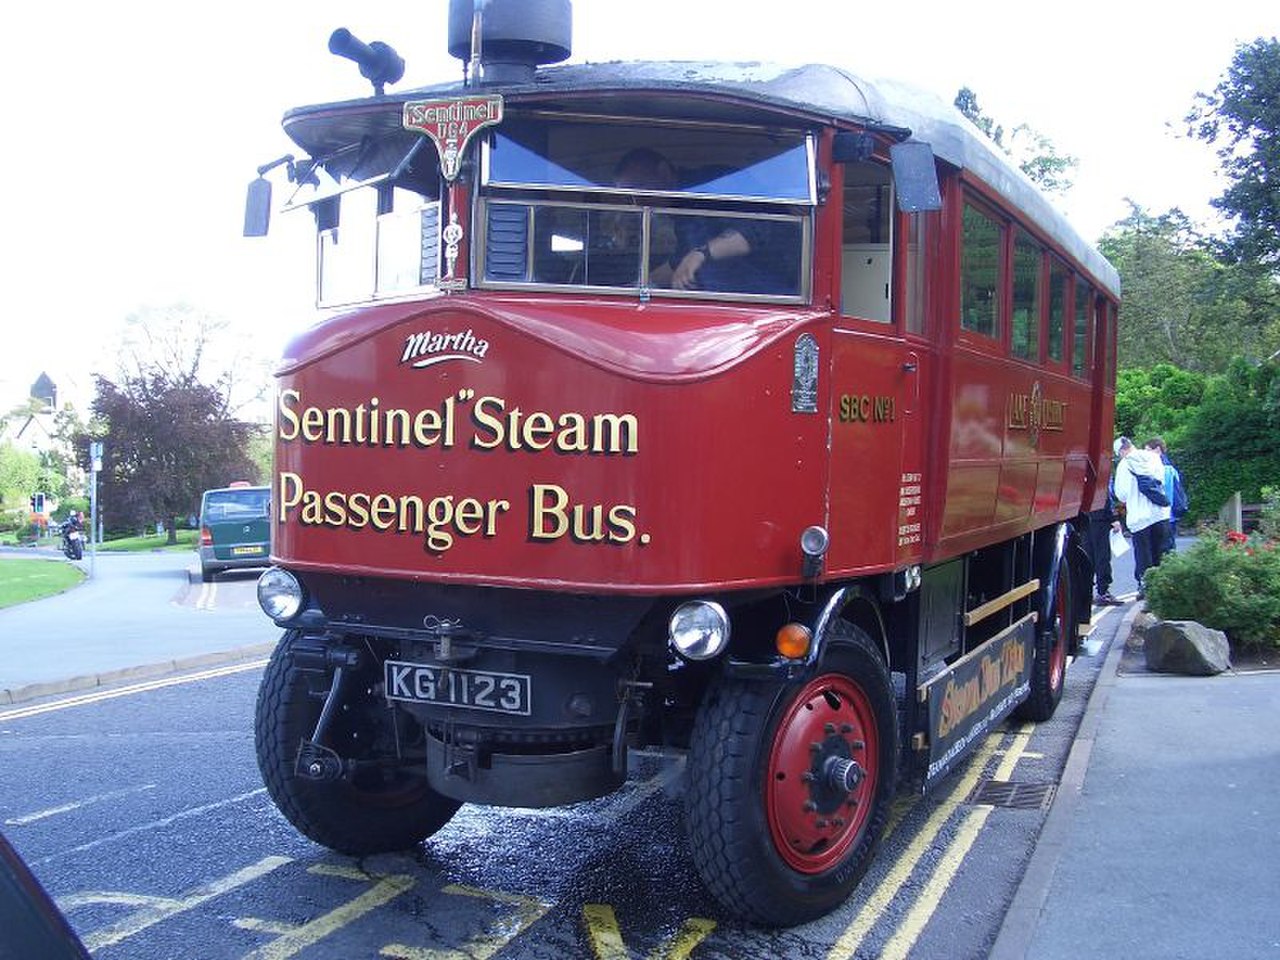 Vehicles powered by steam фото 80